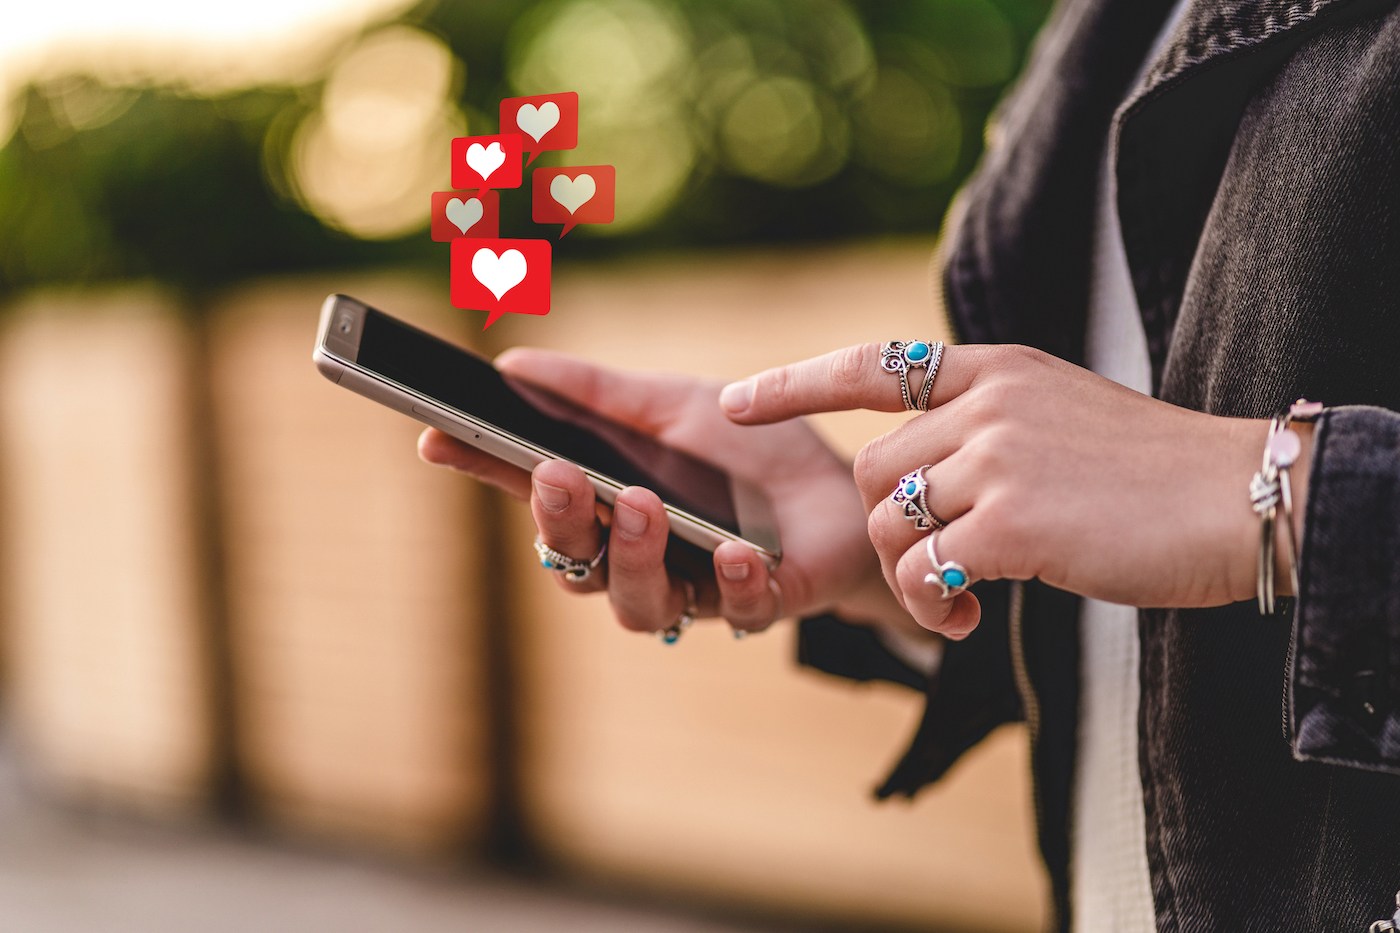 addicted to online dating apps